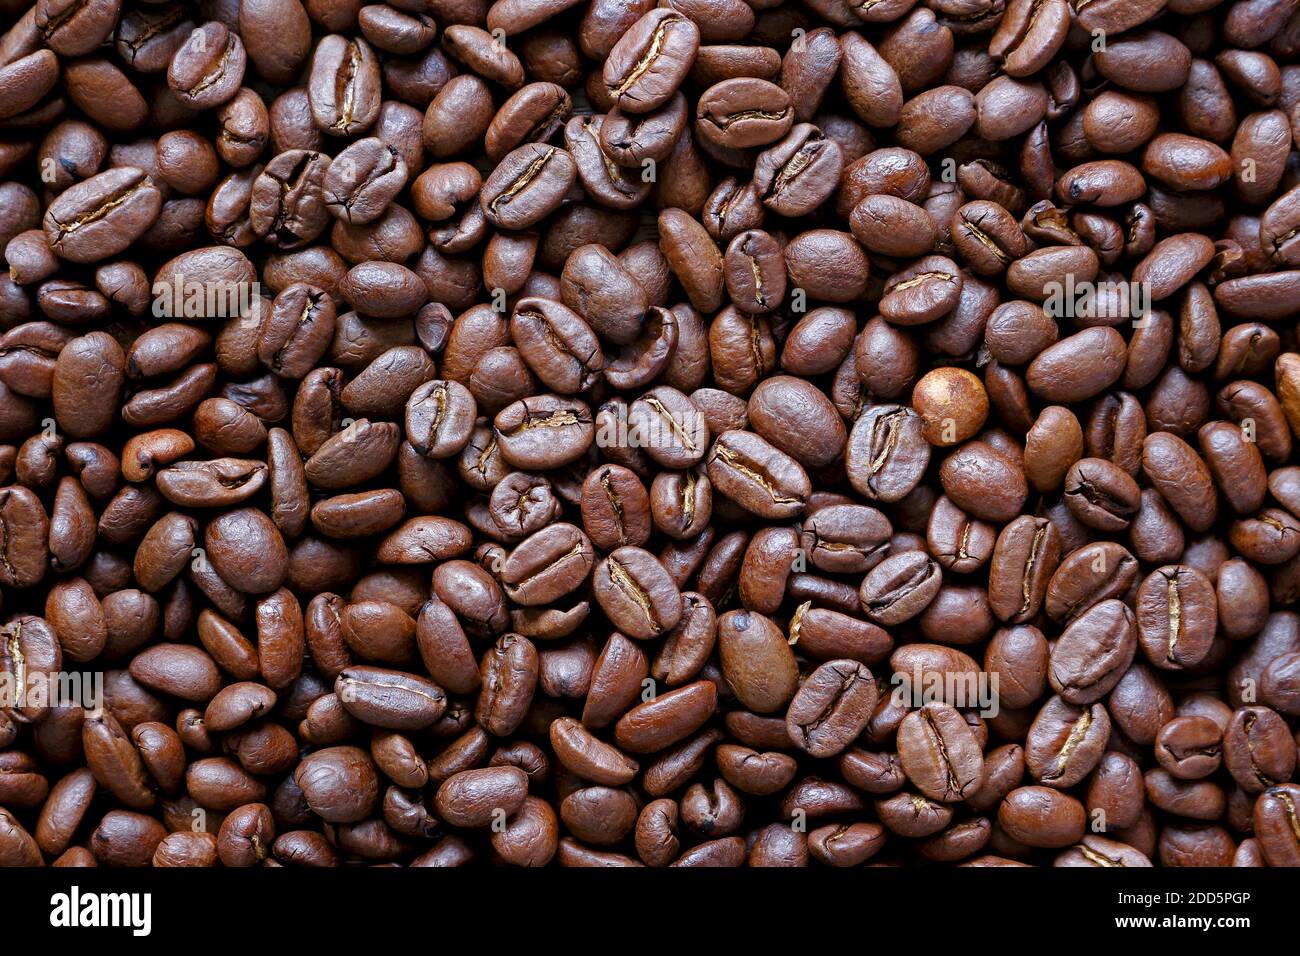 roasted coffee beans background Stock Photo